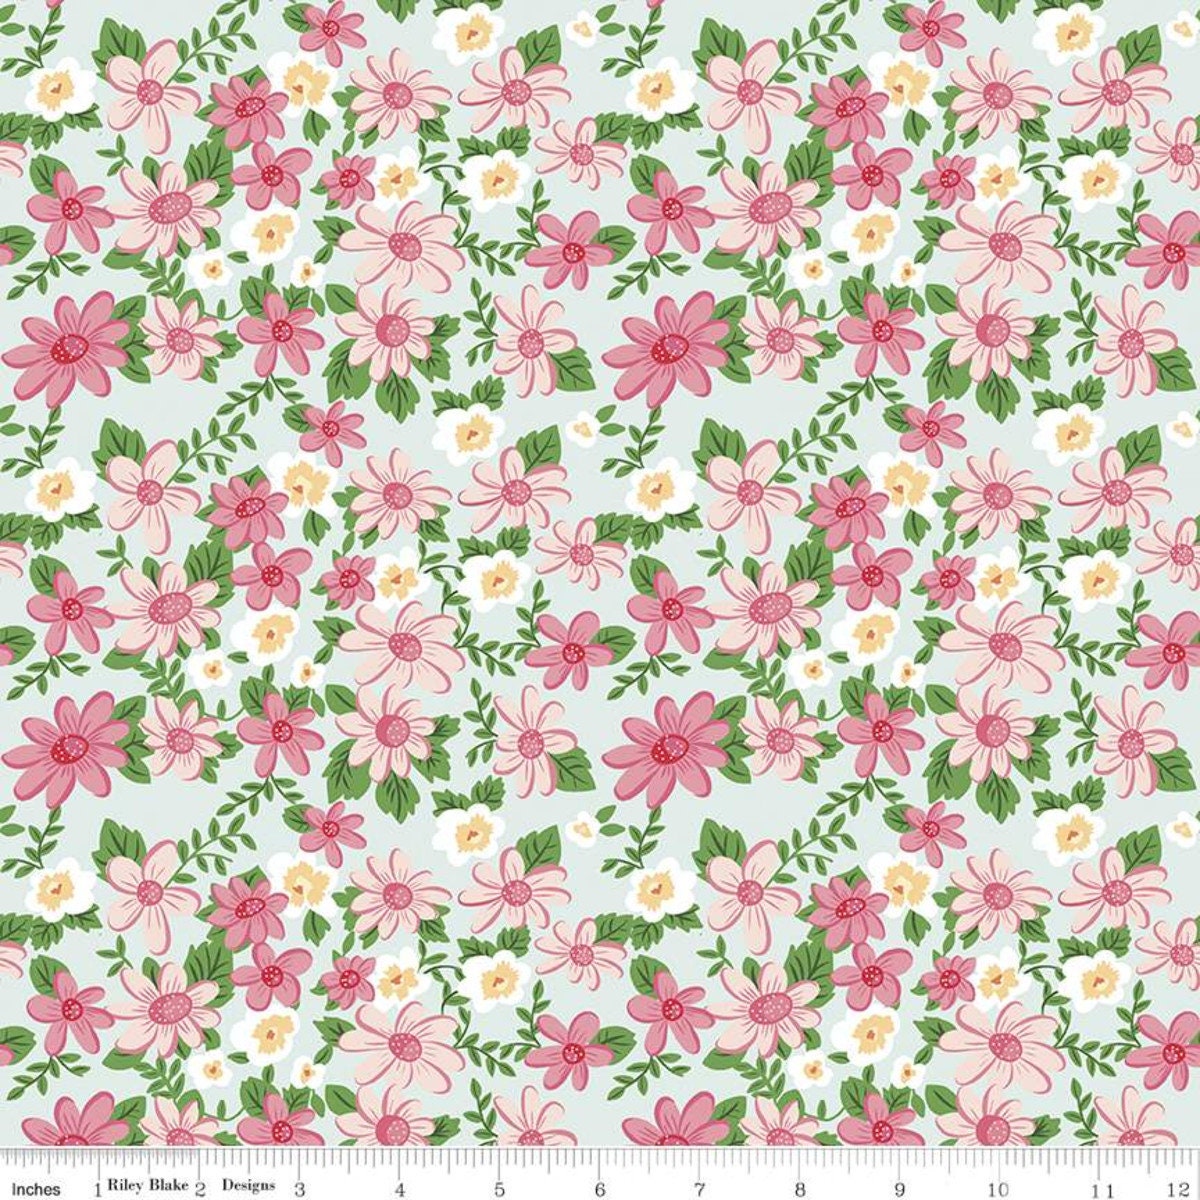 Summer Picnic Floral Fabric Strips, Strawberries, Cherries, Gingham, Pink, Blue, Green, 2.5 inch strips, 40 Strips Total, Riley Blake